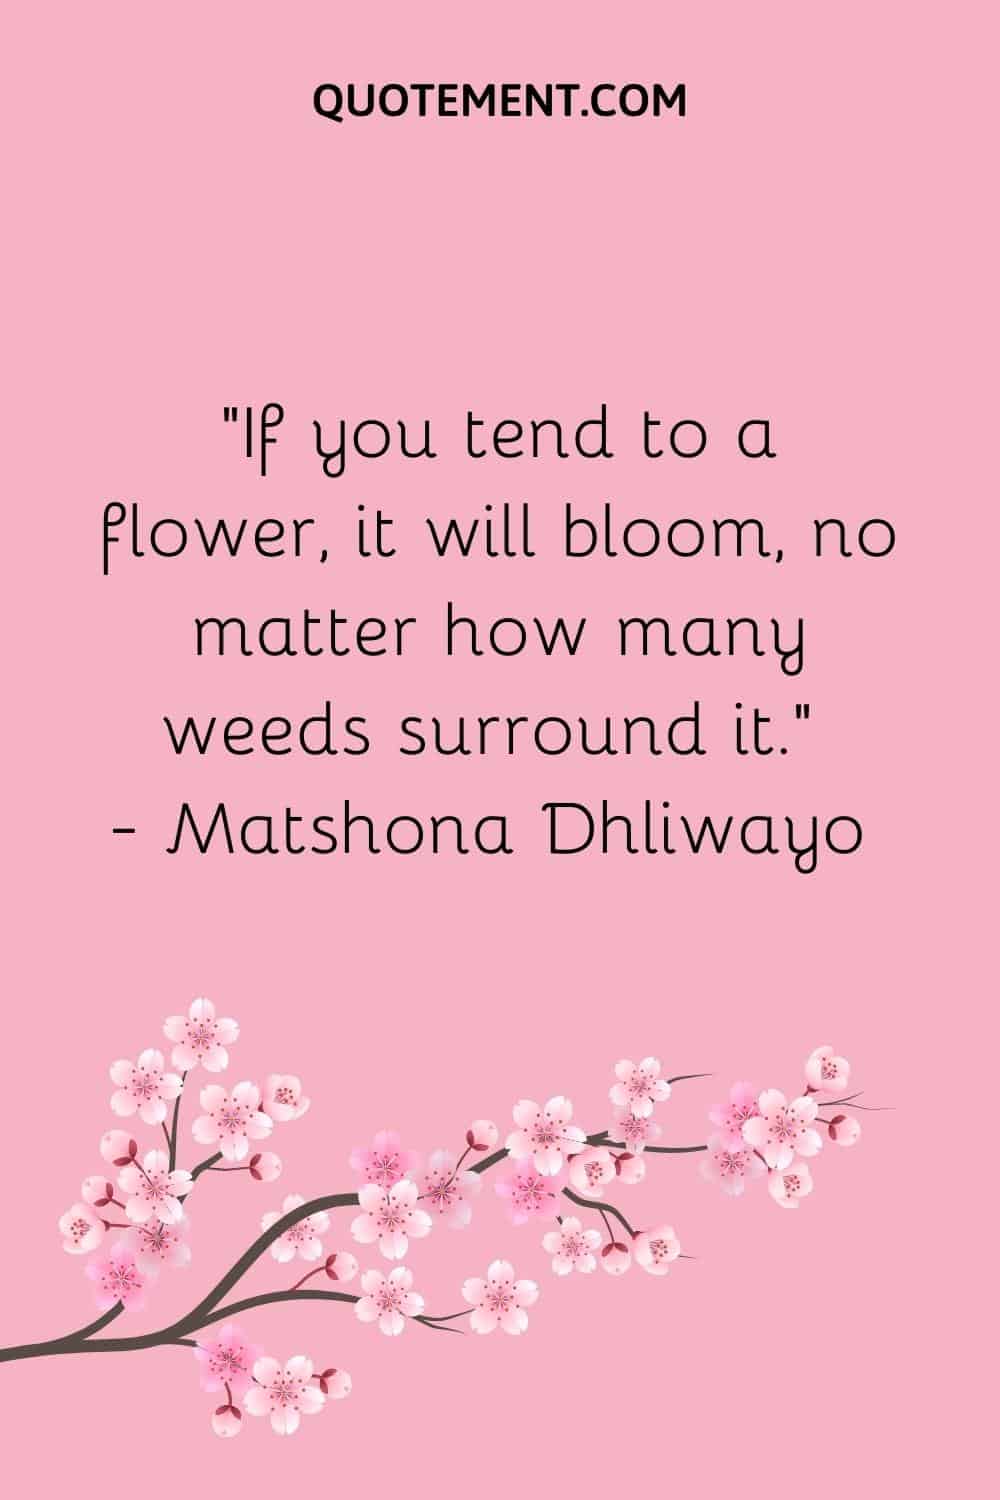 “If you tend to a flower, it will bloom, no matter how many weeds surround it.” — Matshona Dhliwayo